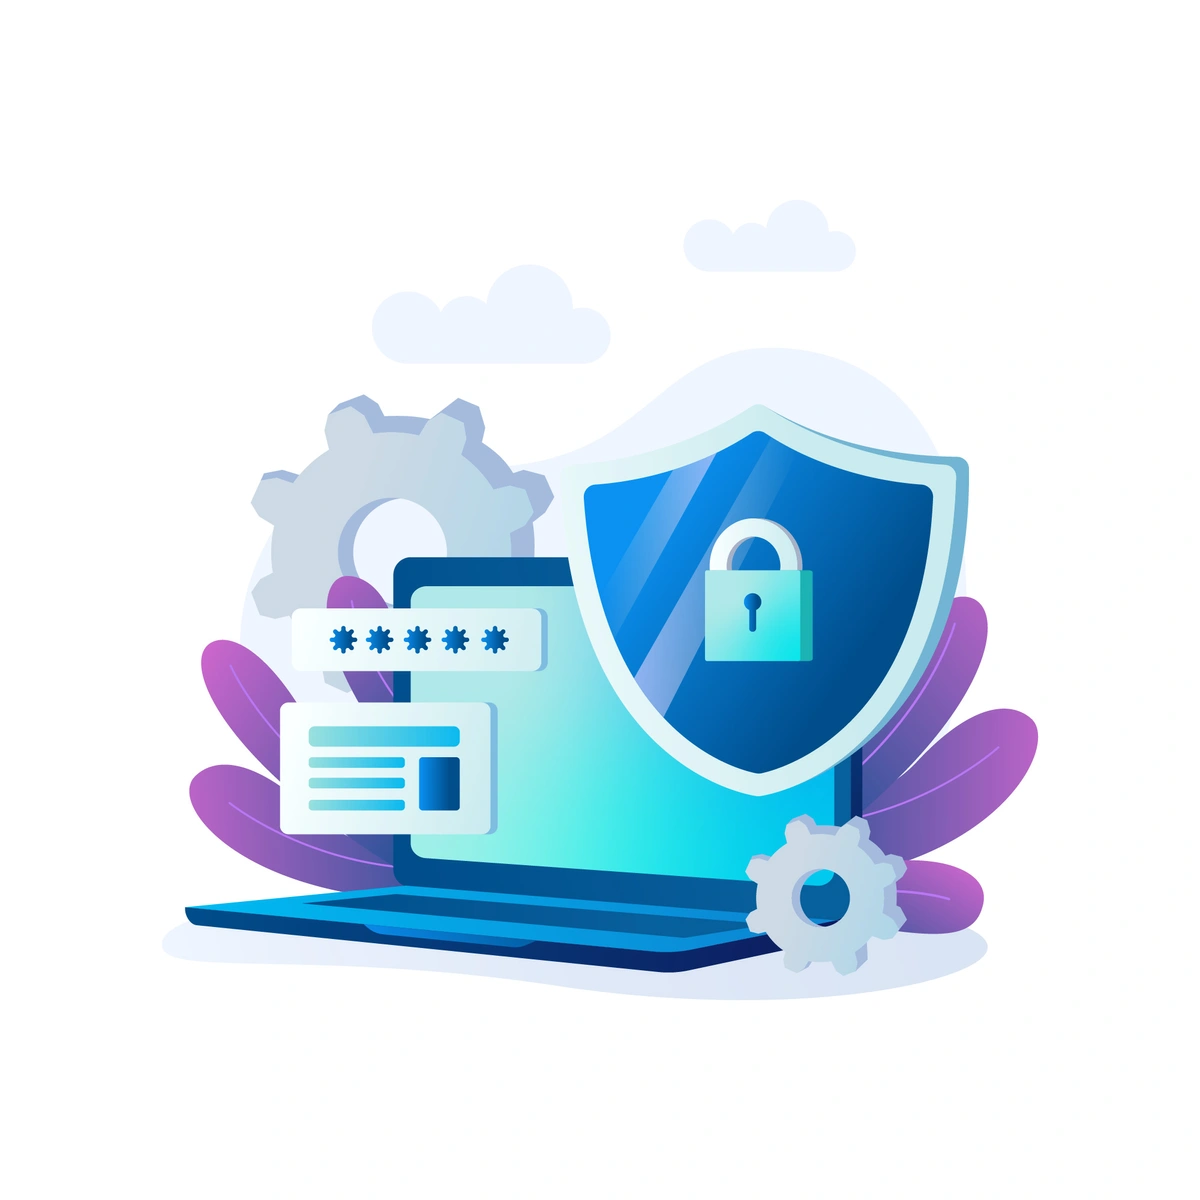 The first image is an iconographic representation of cybersecurity, featuring a laptop with a protective shield and lock icon, surrounded by gears, leaves, and clouds.